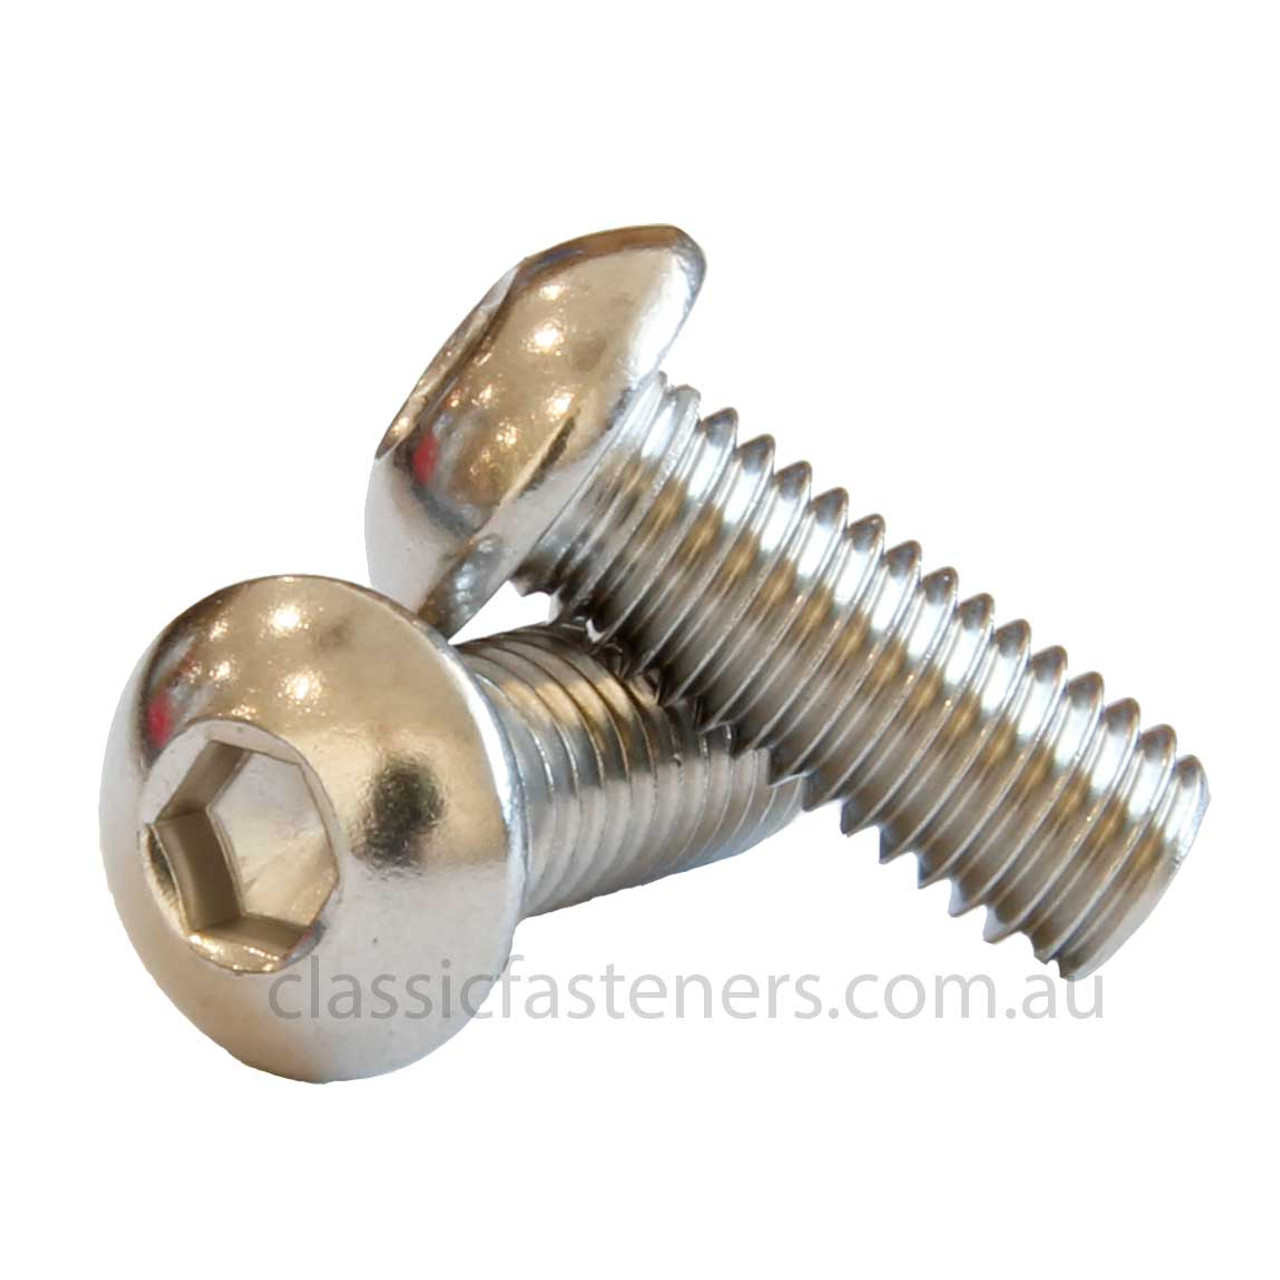 3/8 16 UNC x 1/2 Button Head Socket Screw Stainless (304) Classic  Fasteners